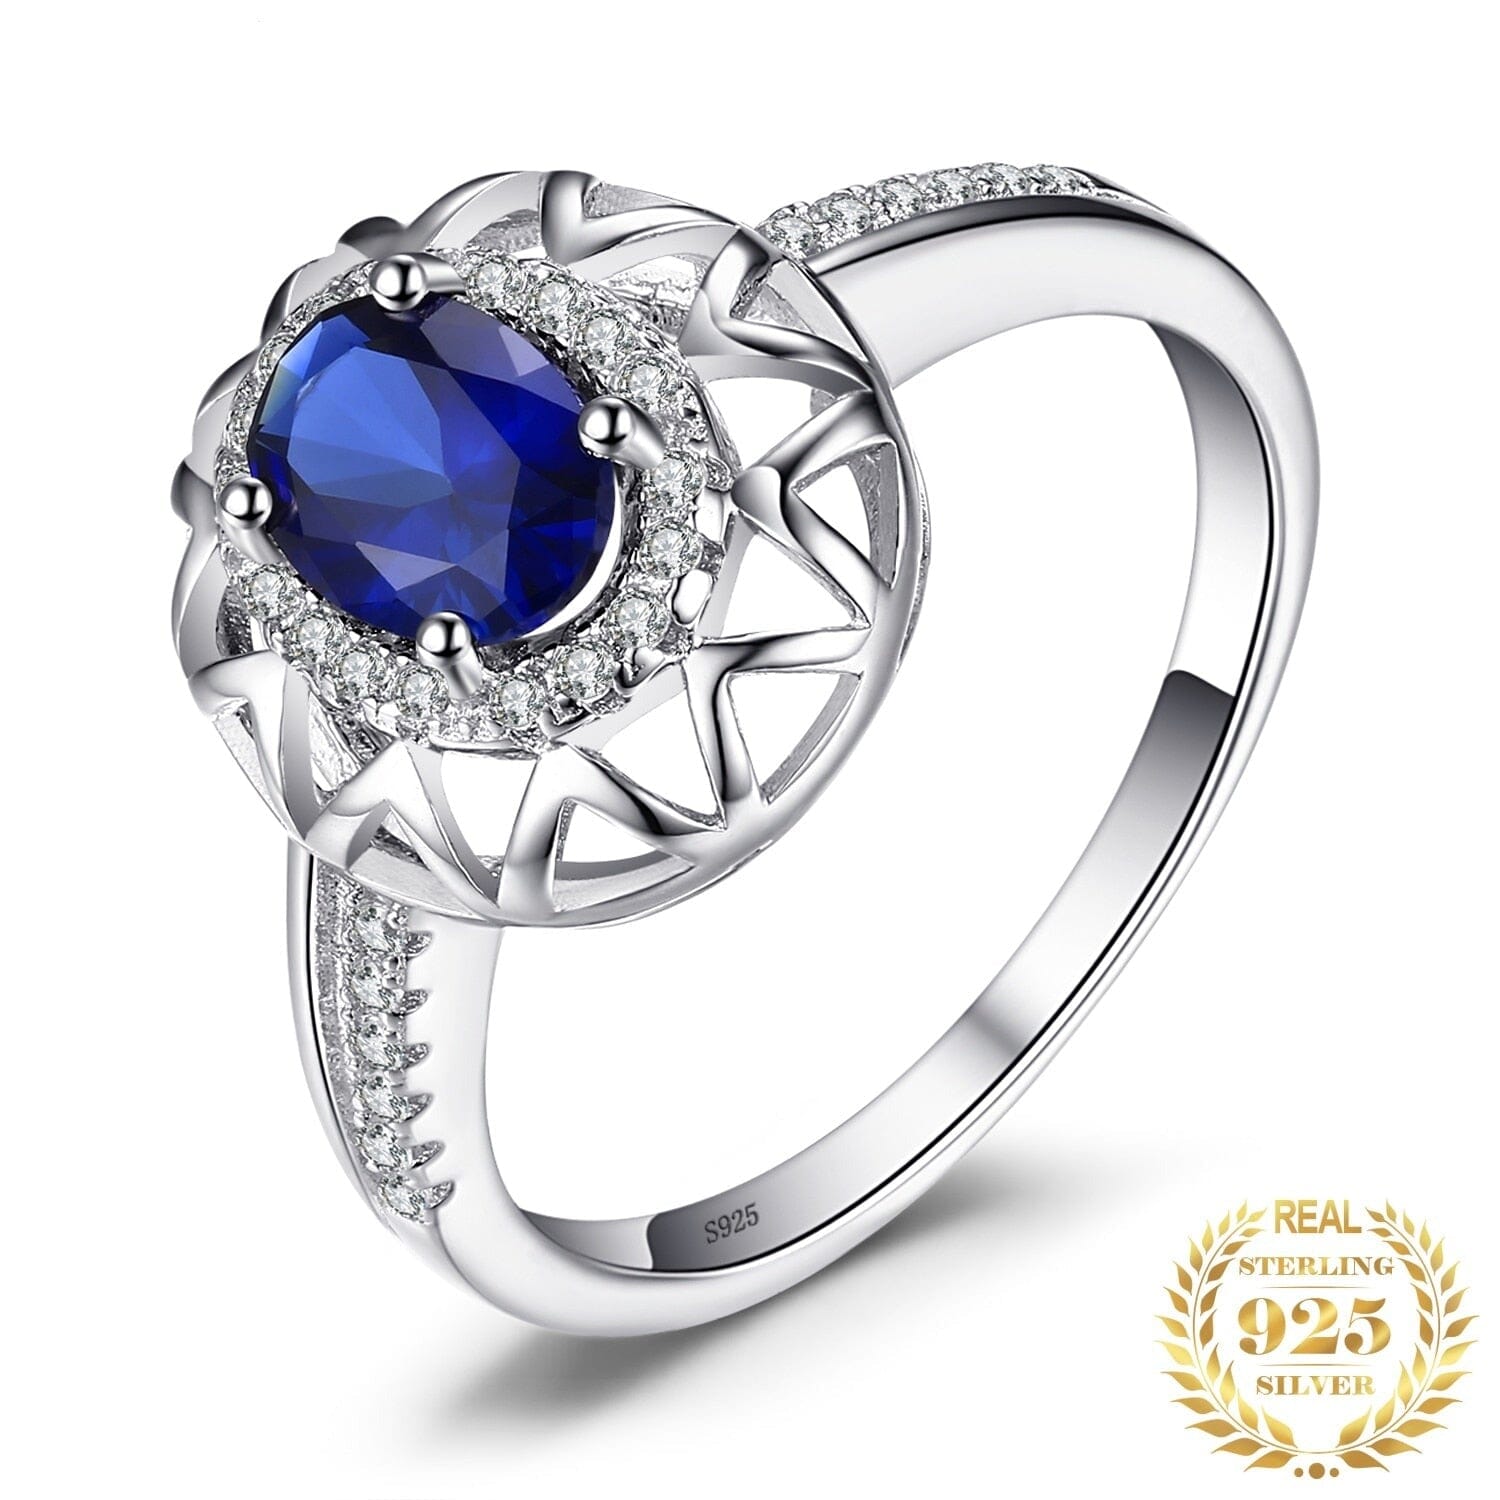 Fashion Statement Created Sapphire Ring - 925 Sterling SilverRing6